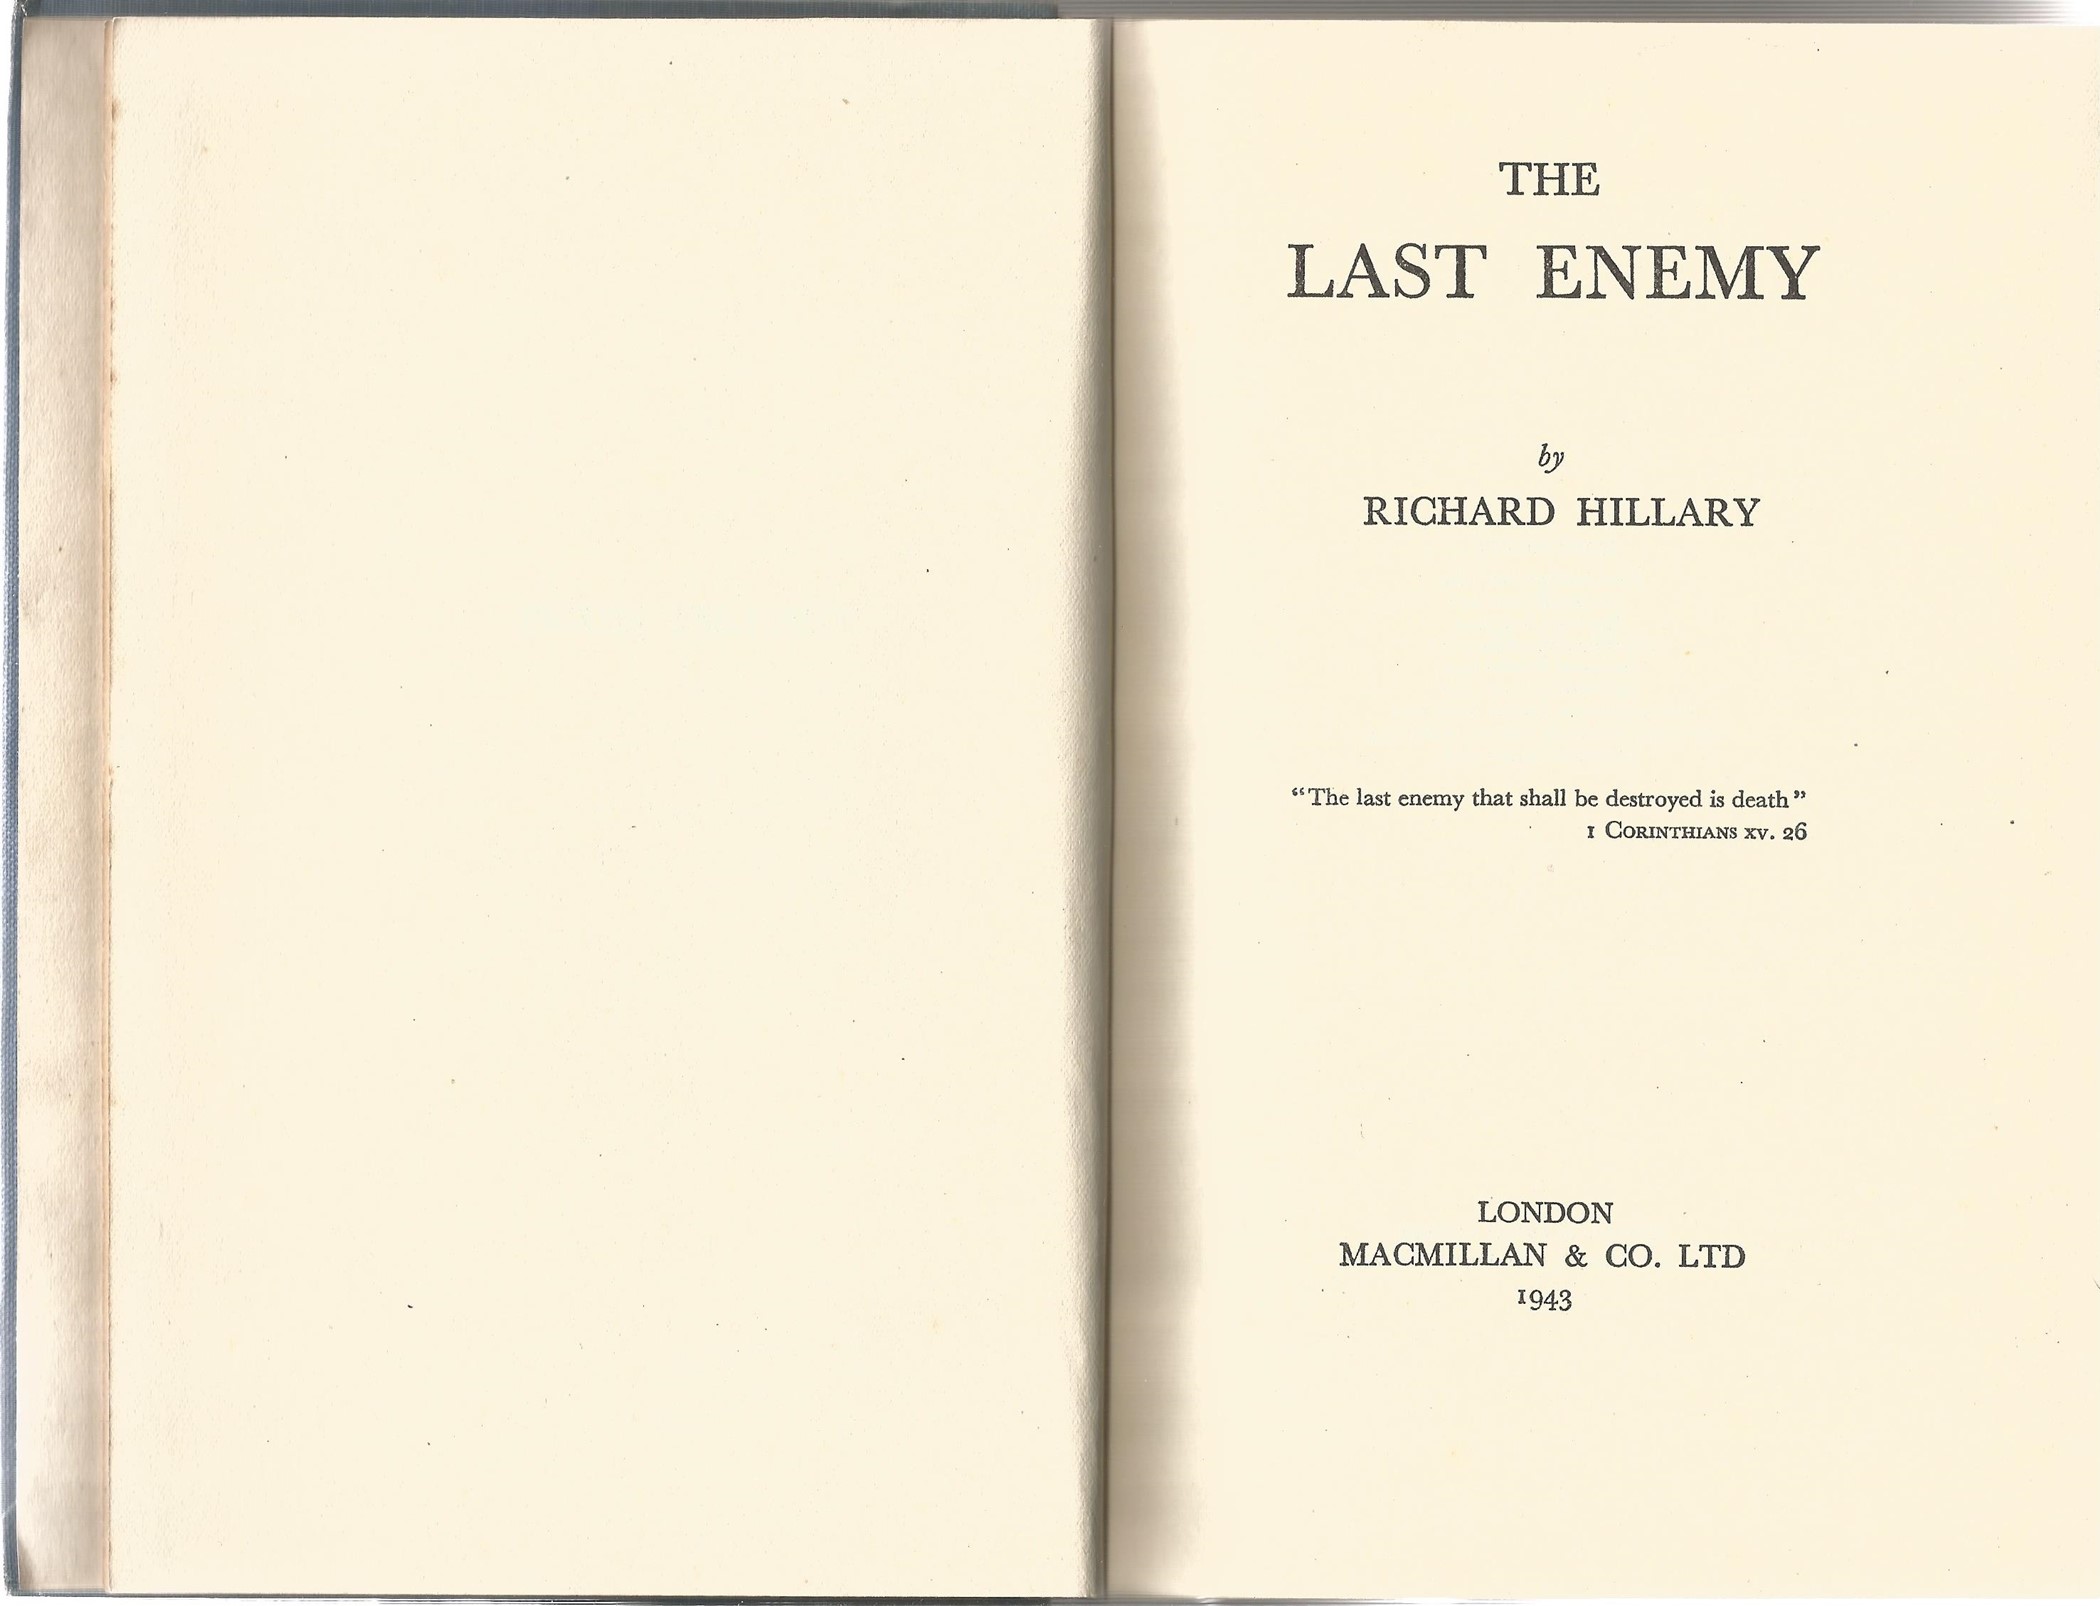 Richard Hillary. The Last Enemy. A Signed hardback book. Signed inside by an Elizabeth Wilkinson - Image 6 of 6